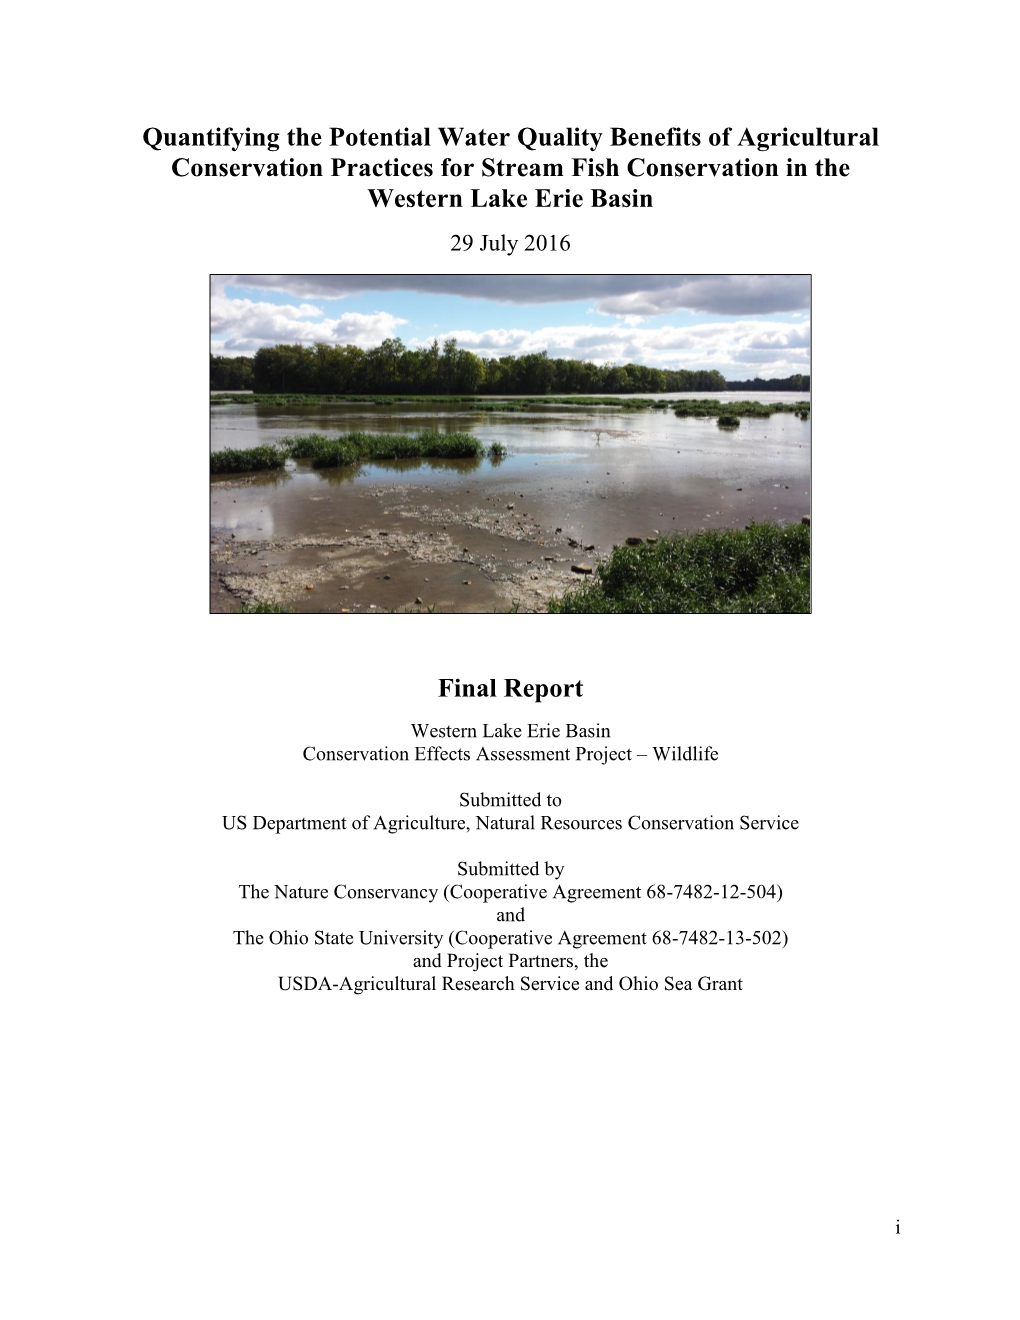 Quantifying the Potential Water Quality Benefits of Agricultural Conservation Practices for Stream Fish Conservation in the Western Lake Erie Basin 29 July 2016